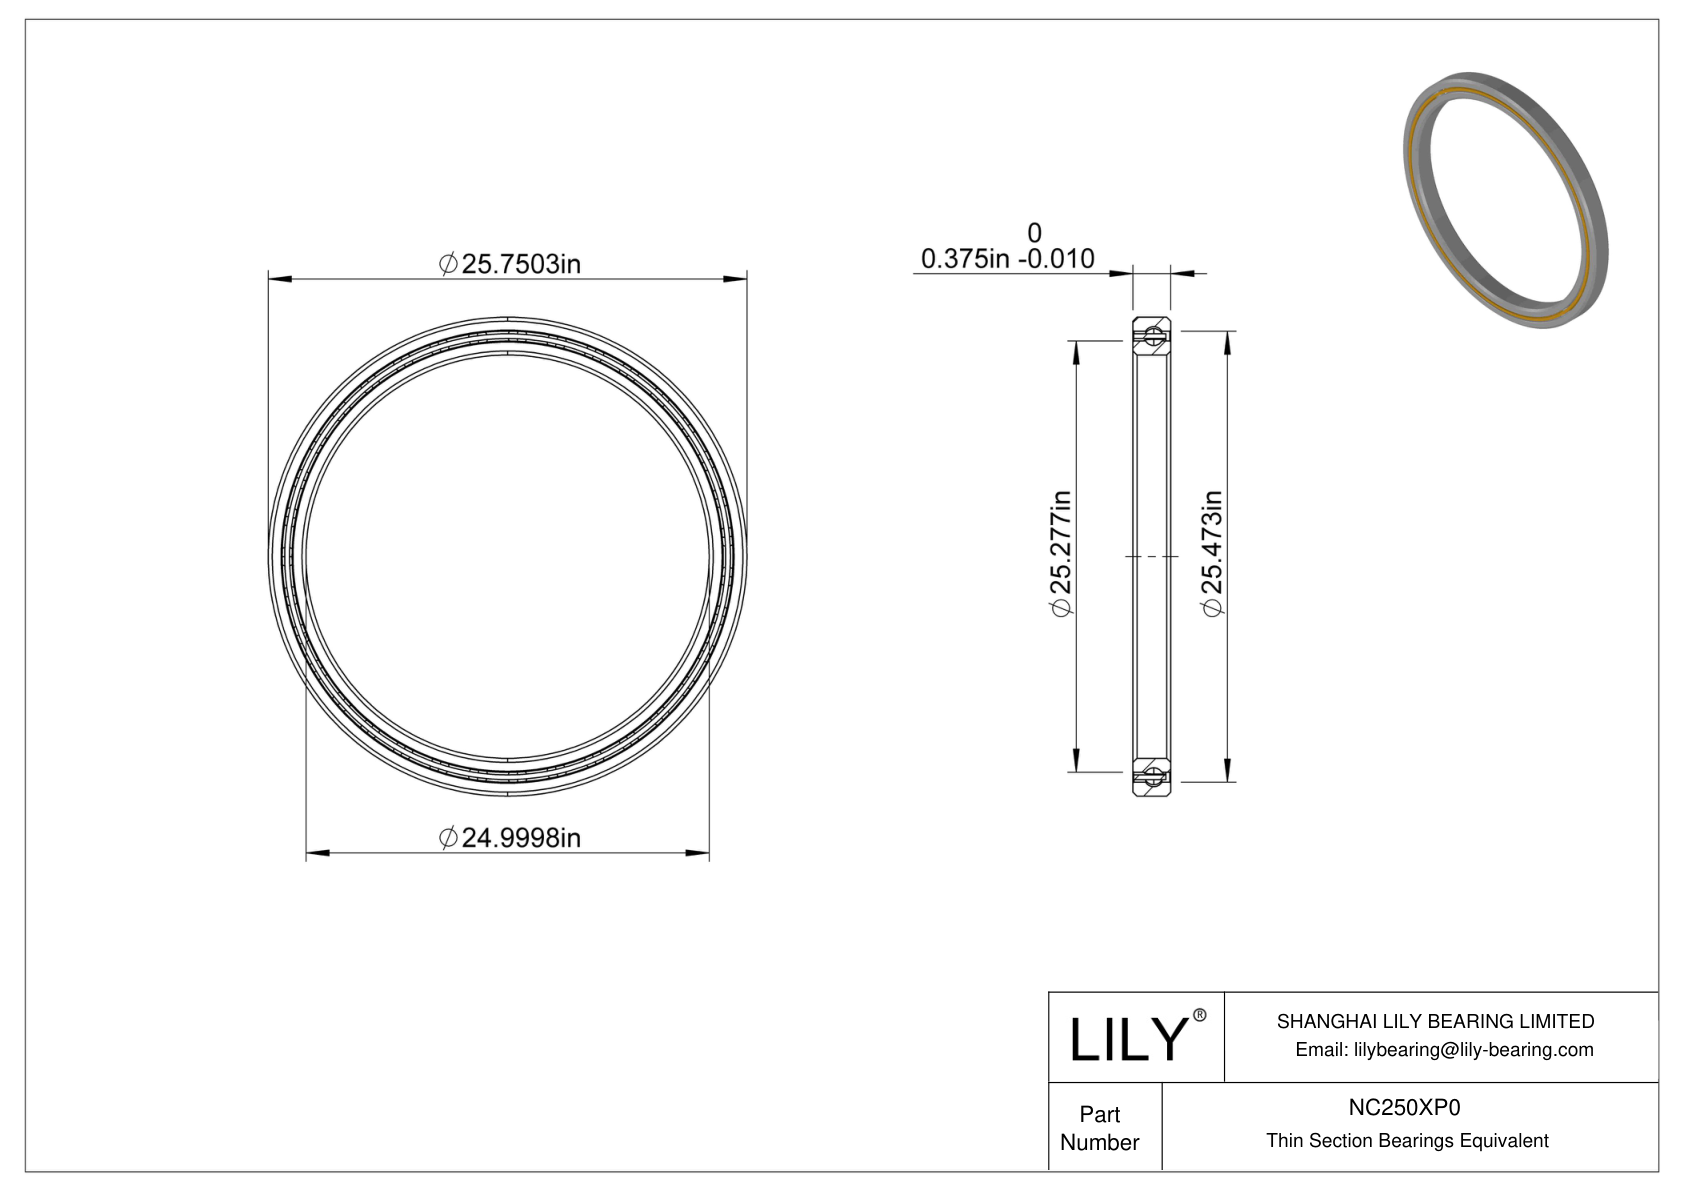 NC250XP0 Constant Section (CS) Bearings cad drawing